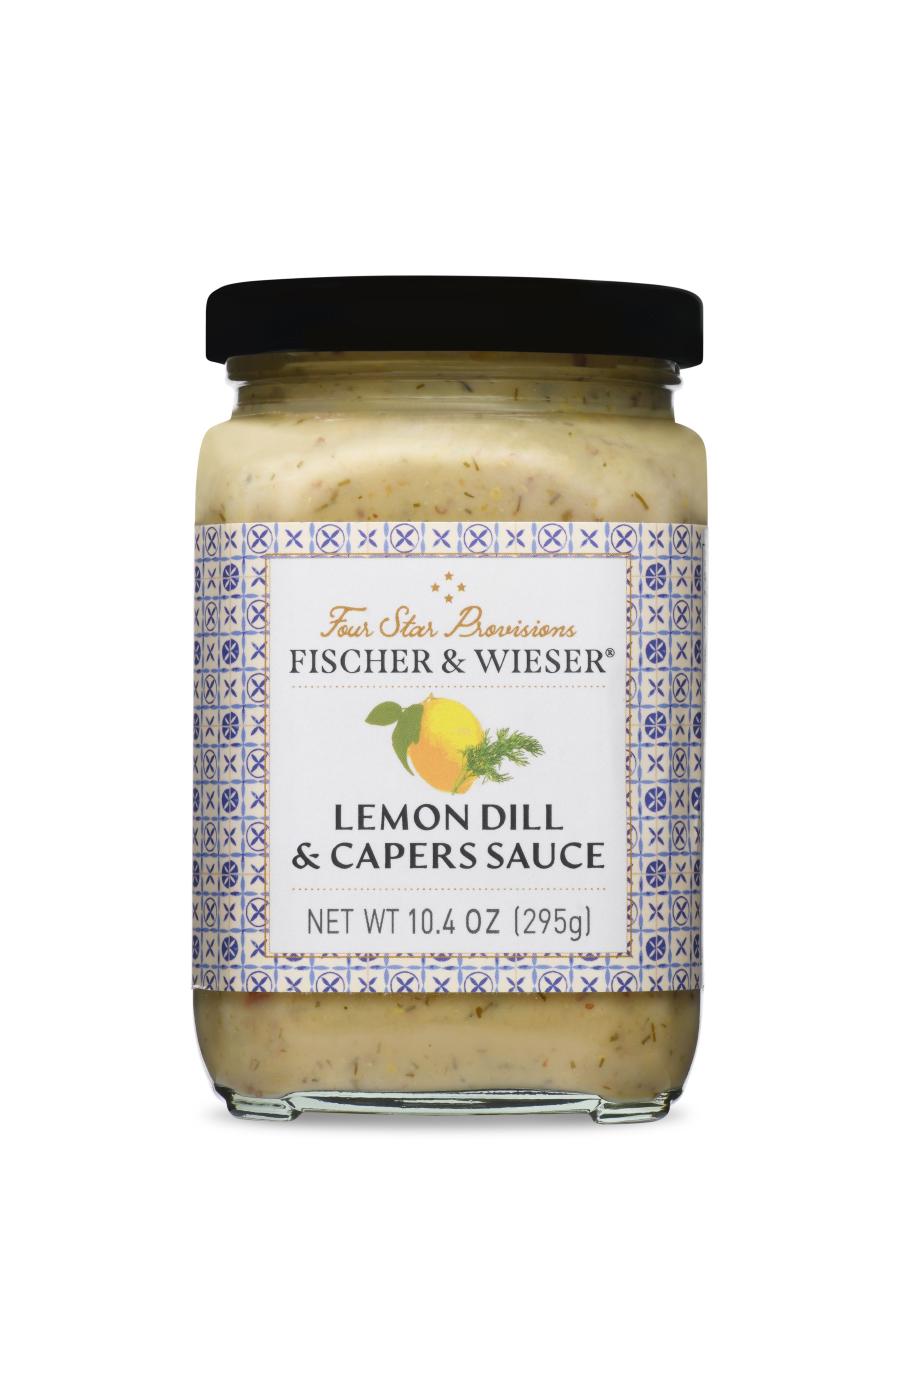 Fischer & Wieser Four Star Provisions Lemon Dill & Capers Sauce; image 1 of 2